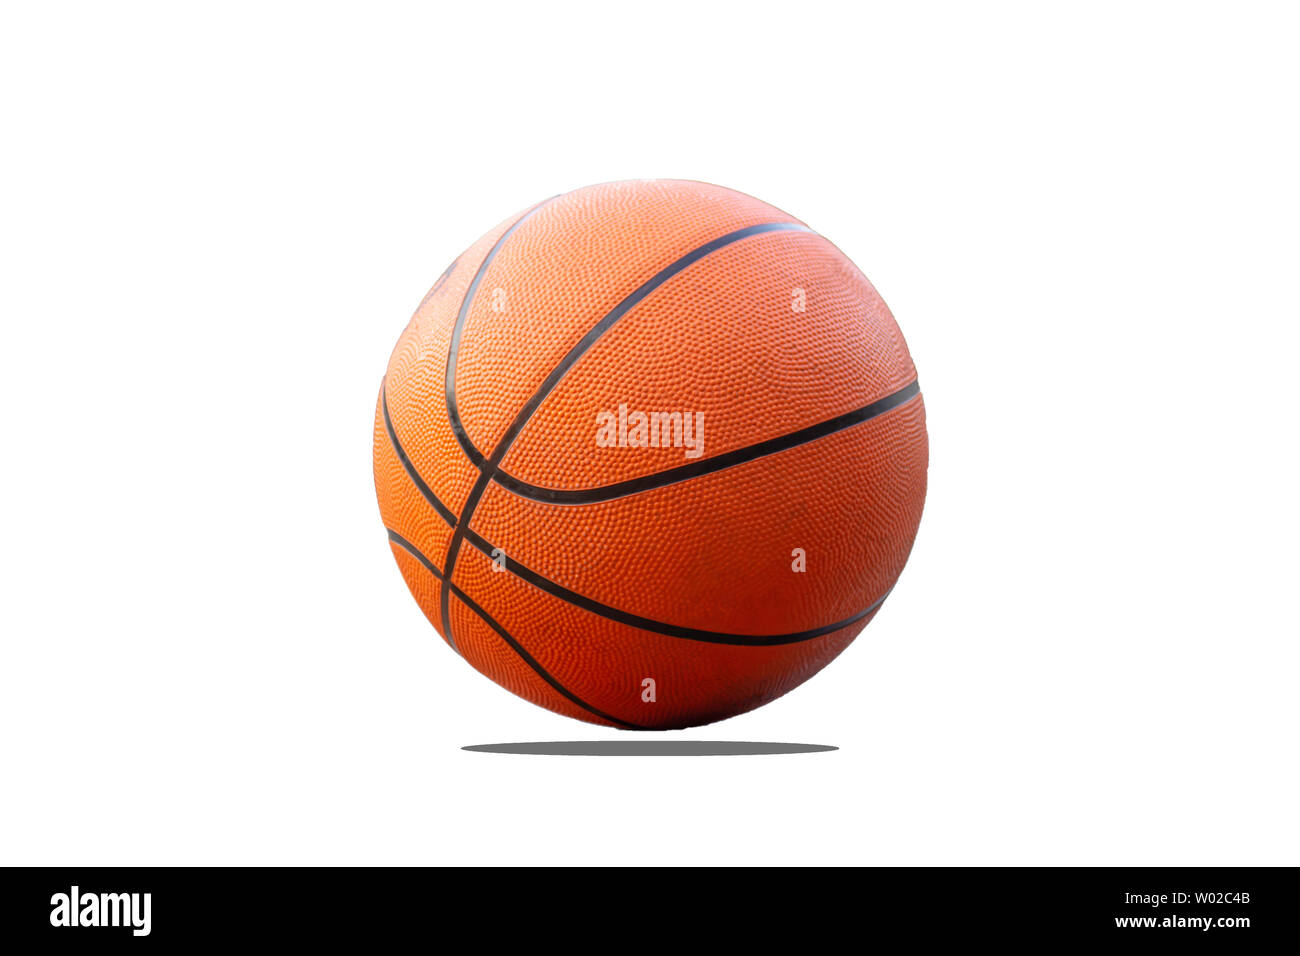 Basketball on a white background with clipping path. Stock Photo